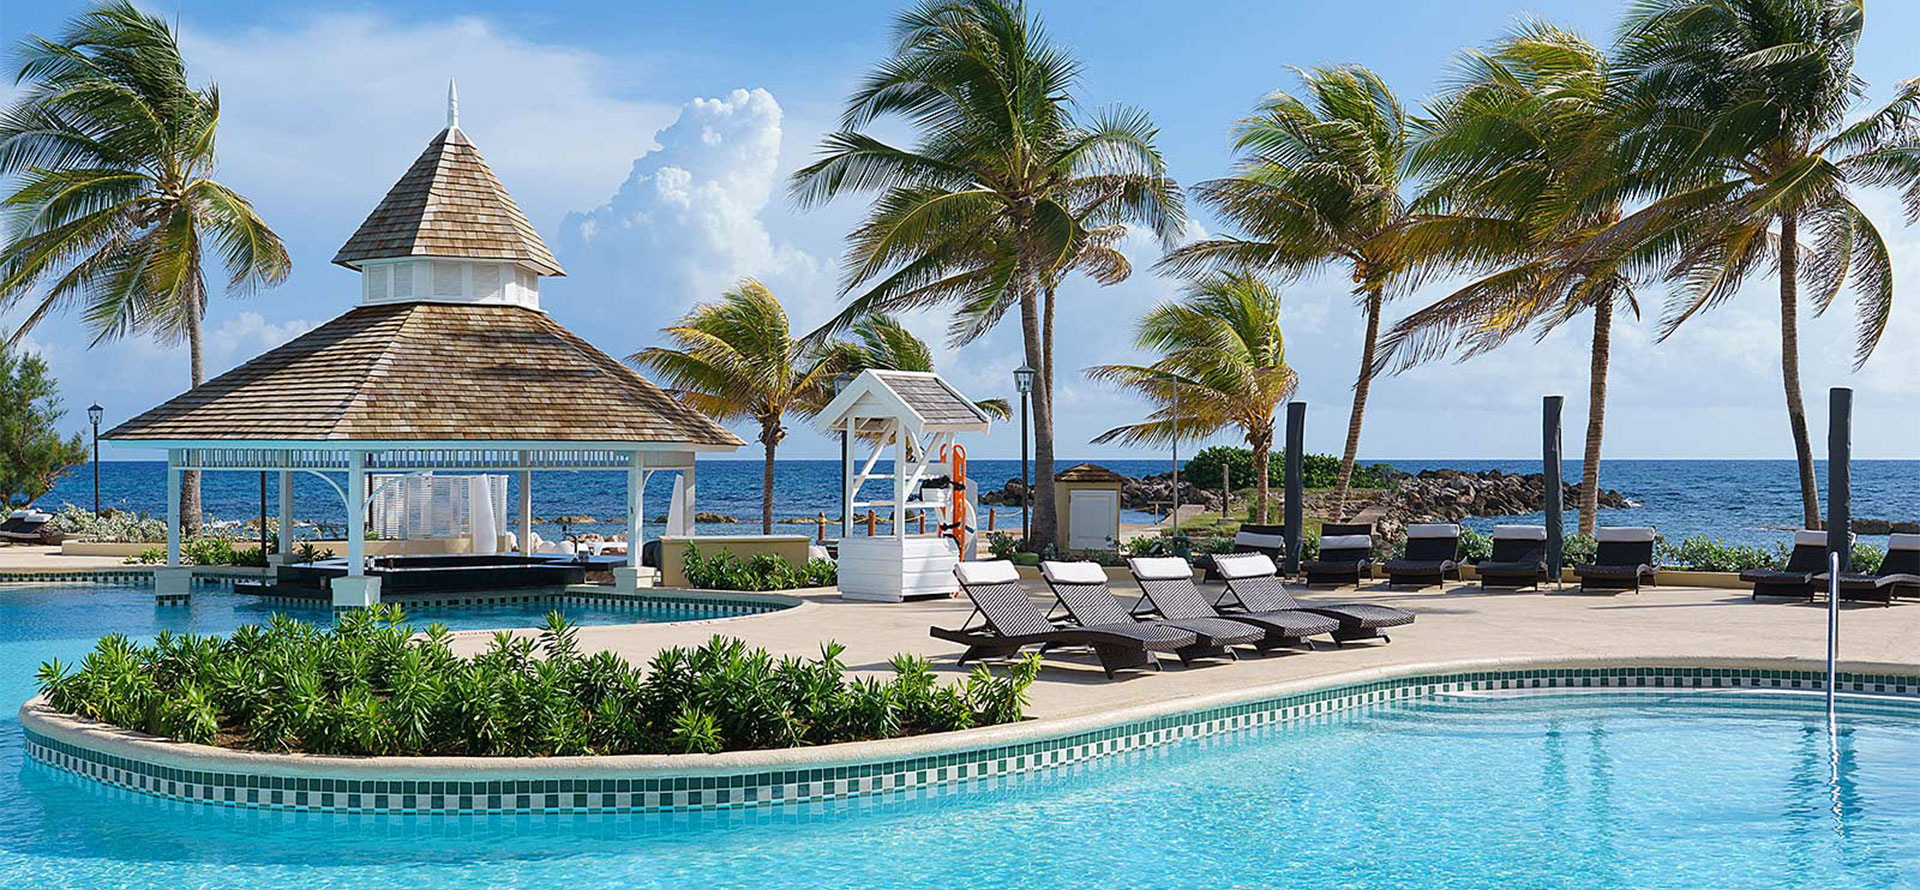 Jamaica all-inclusive adults only resort with palmtree.